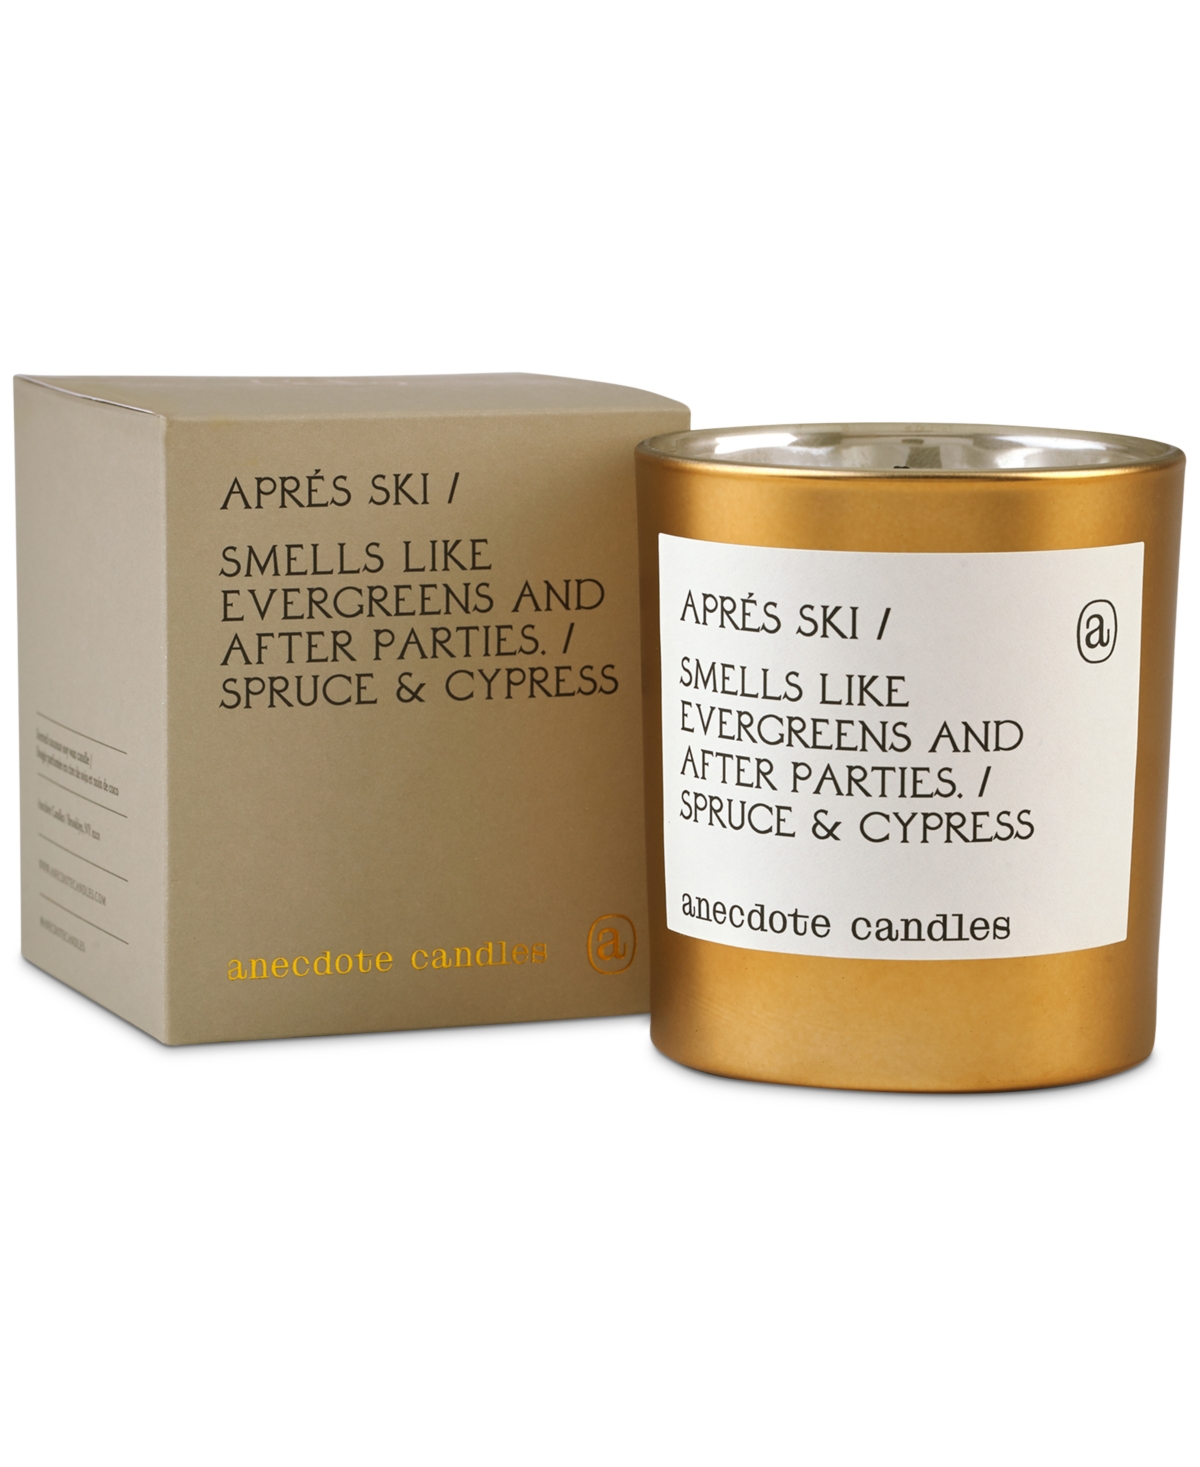 Anecdote Candles Apres Ski Smells Like Evergreens and After Parties Candle, 9-oz. | Macys (US)